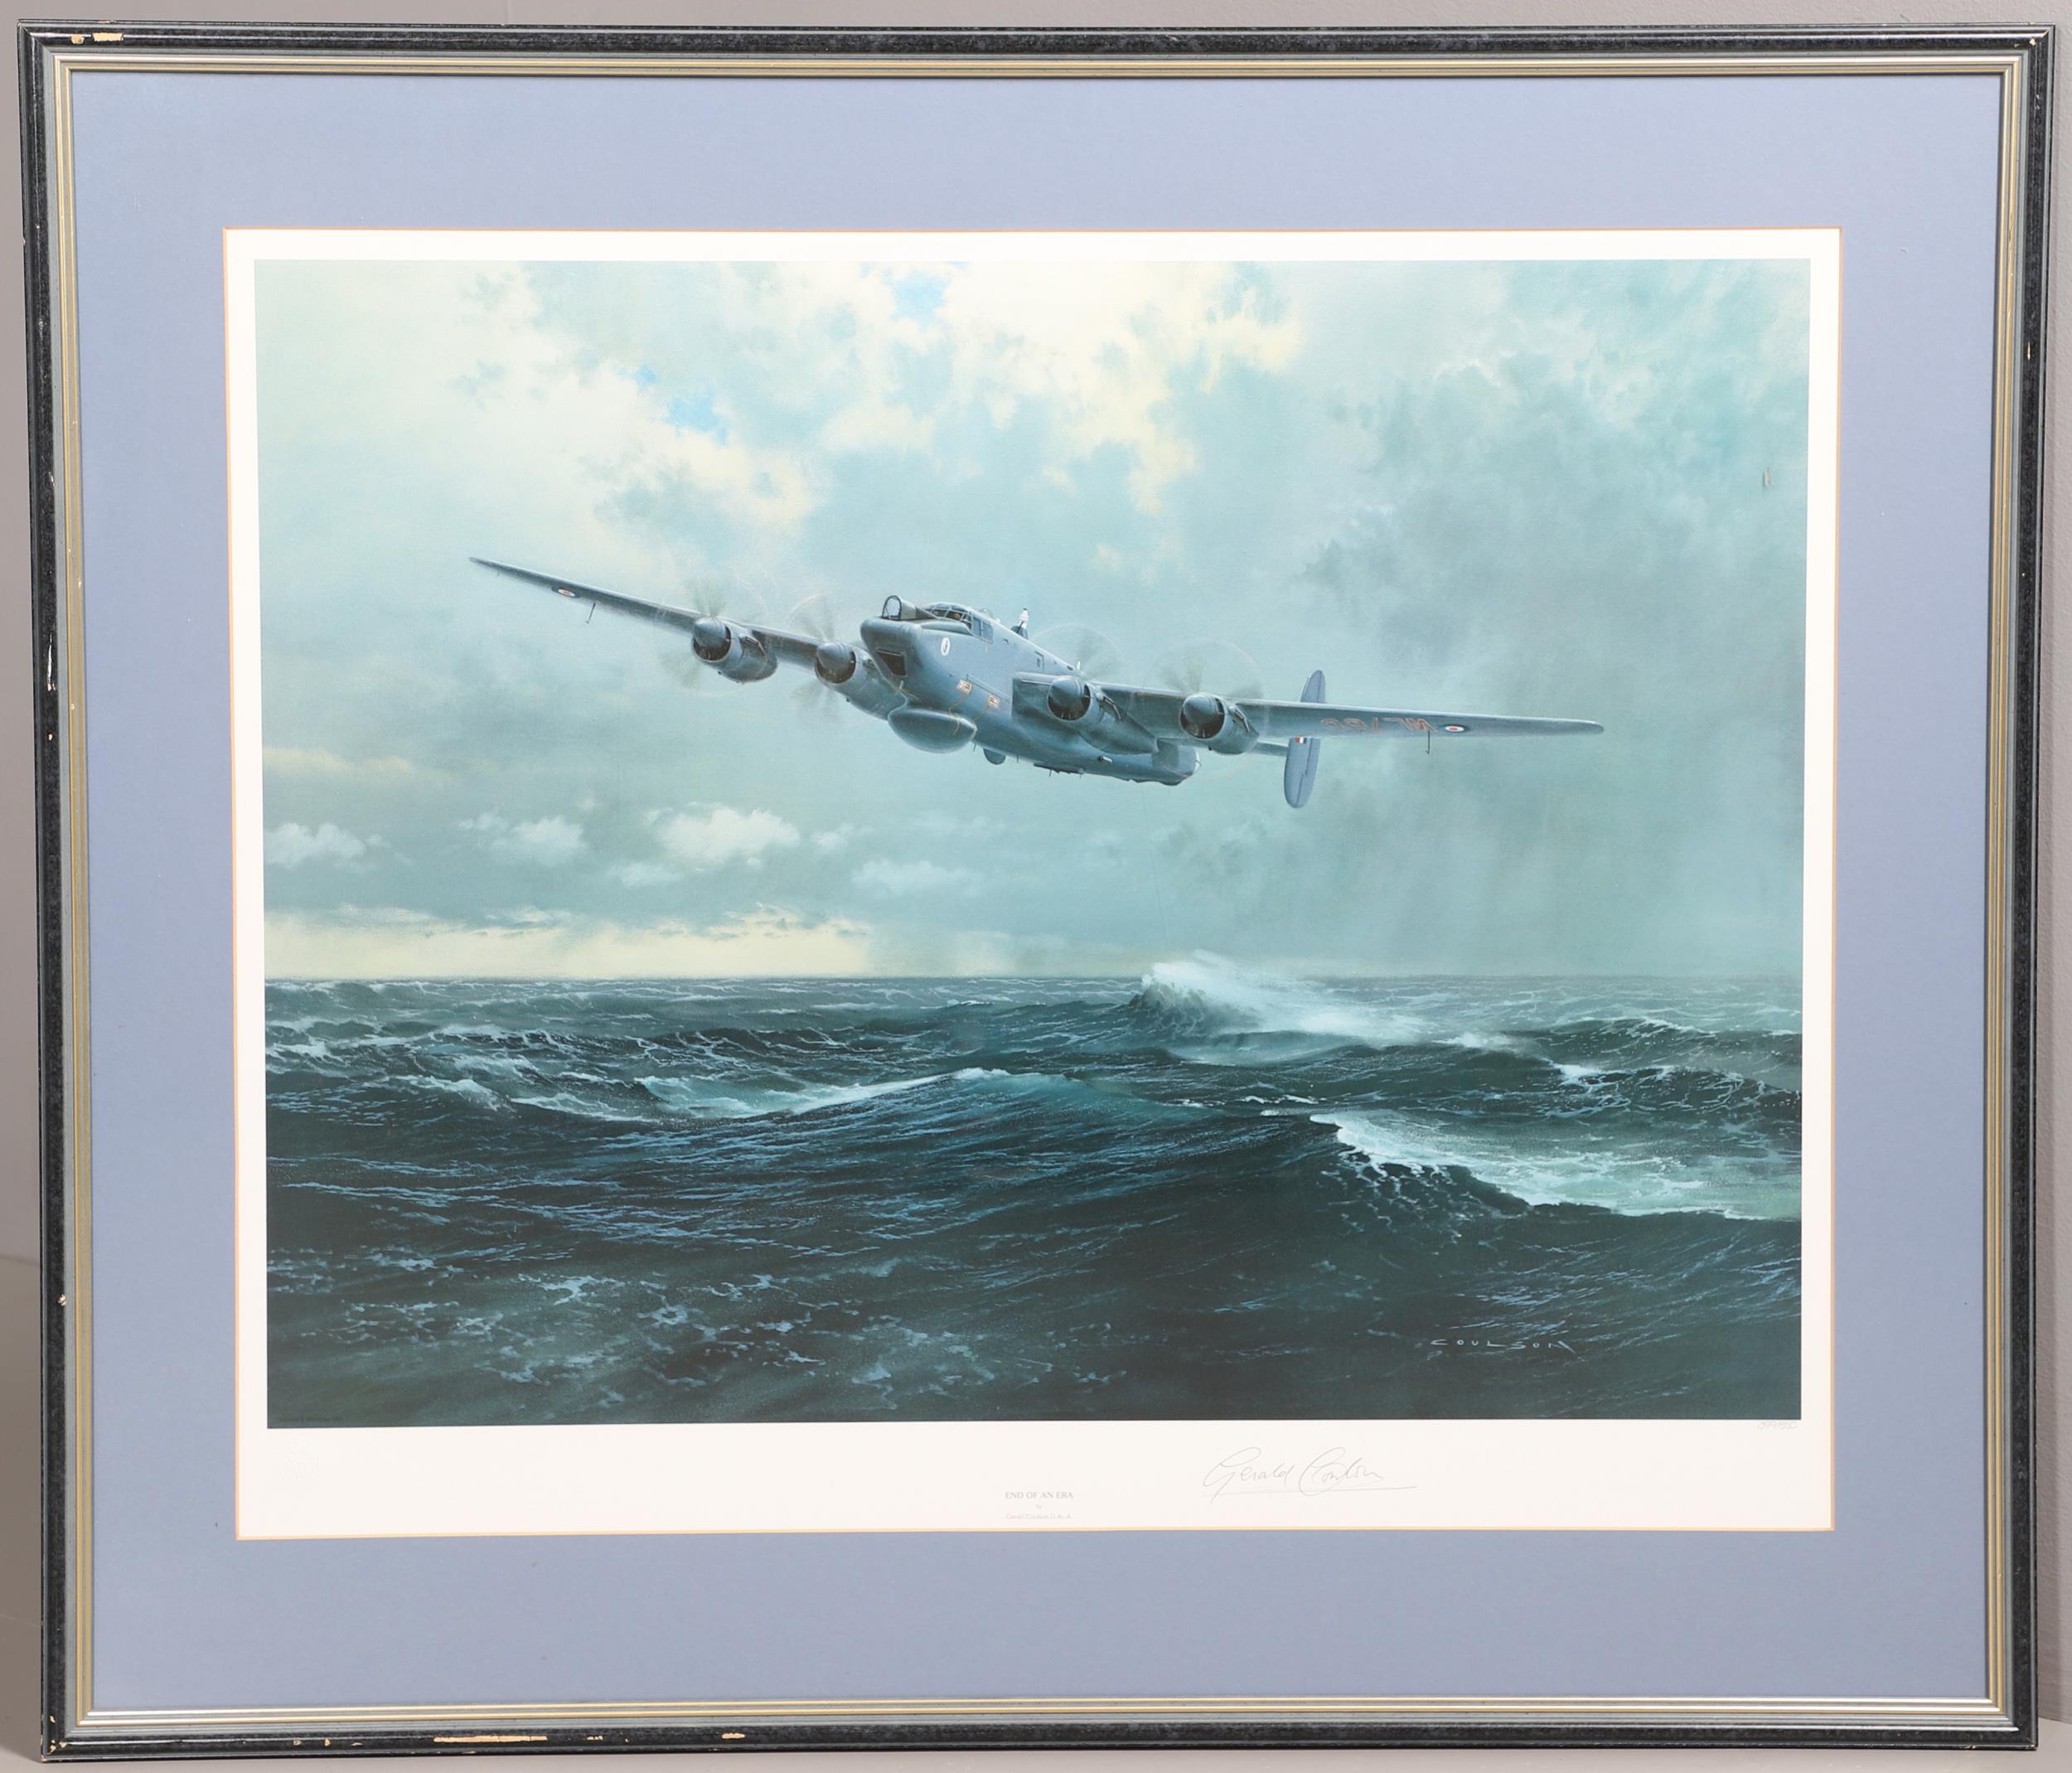 GERALD COULSON 'END OF AN ERA' SIGNED PRINT OF AN AVRO SHACKELTON.